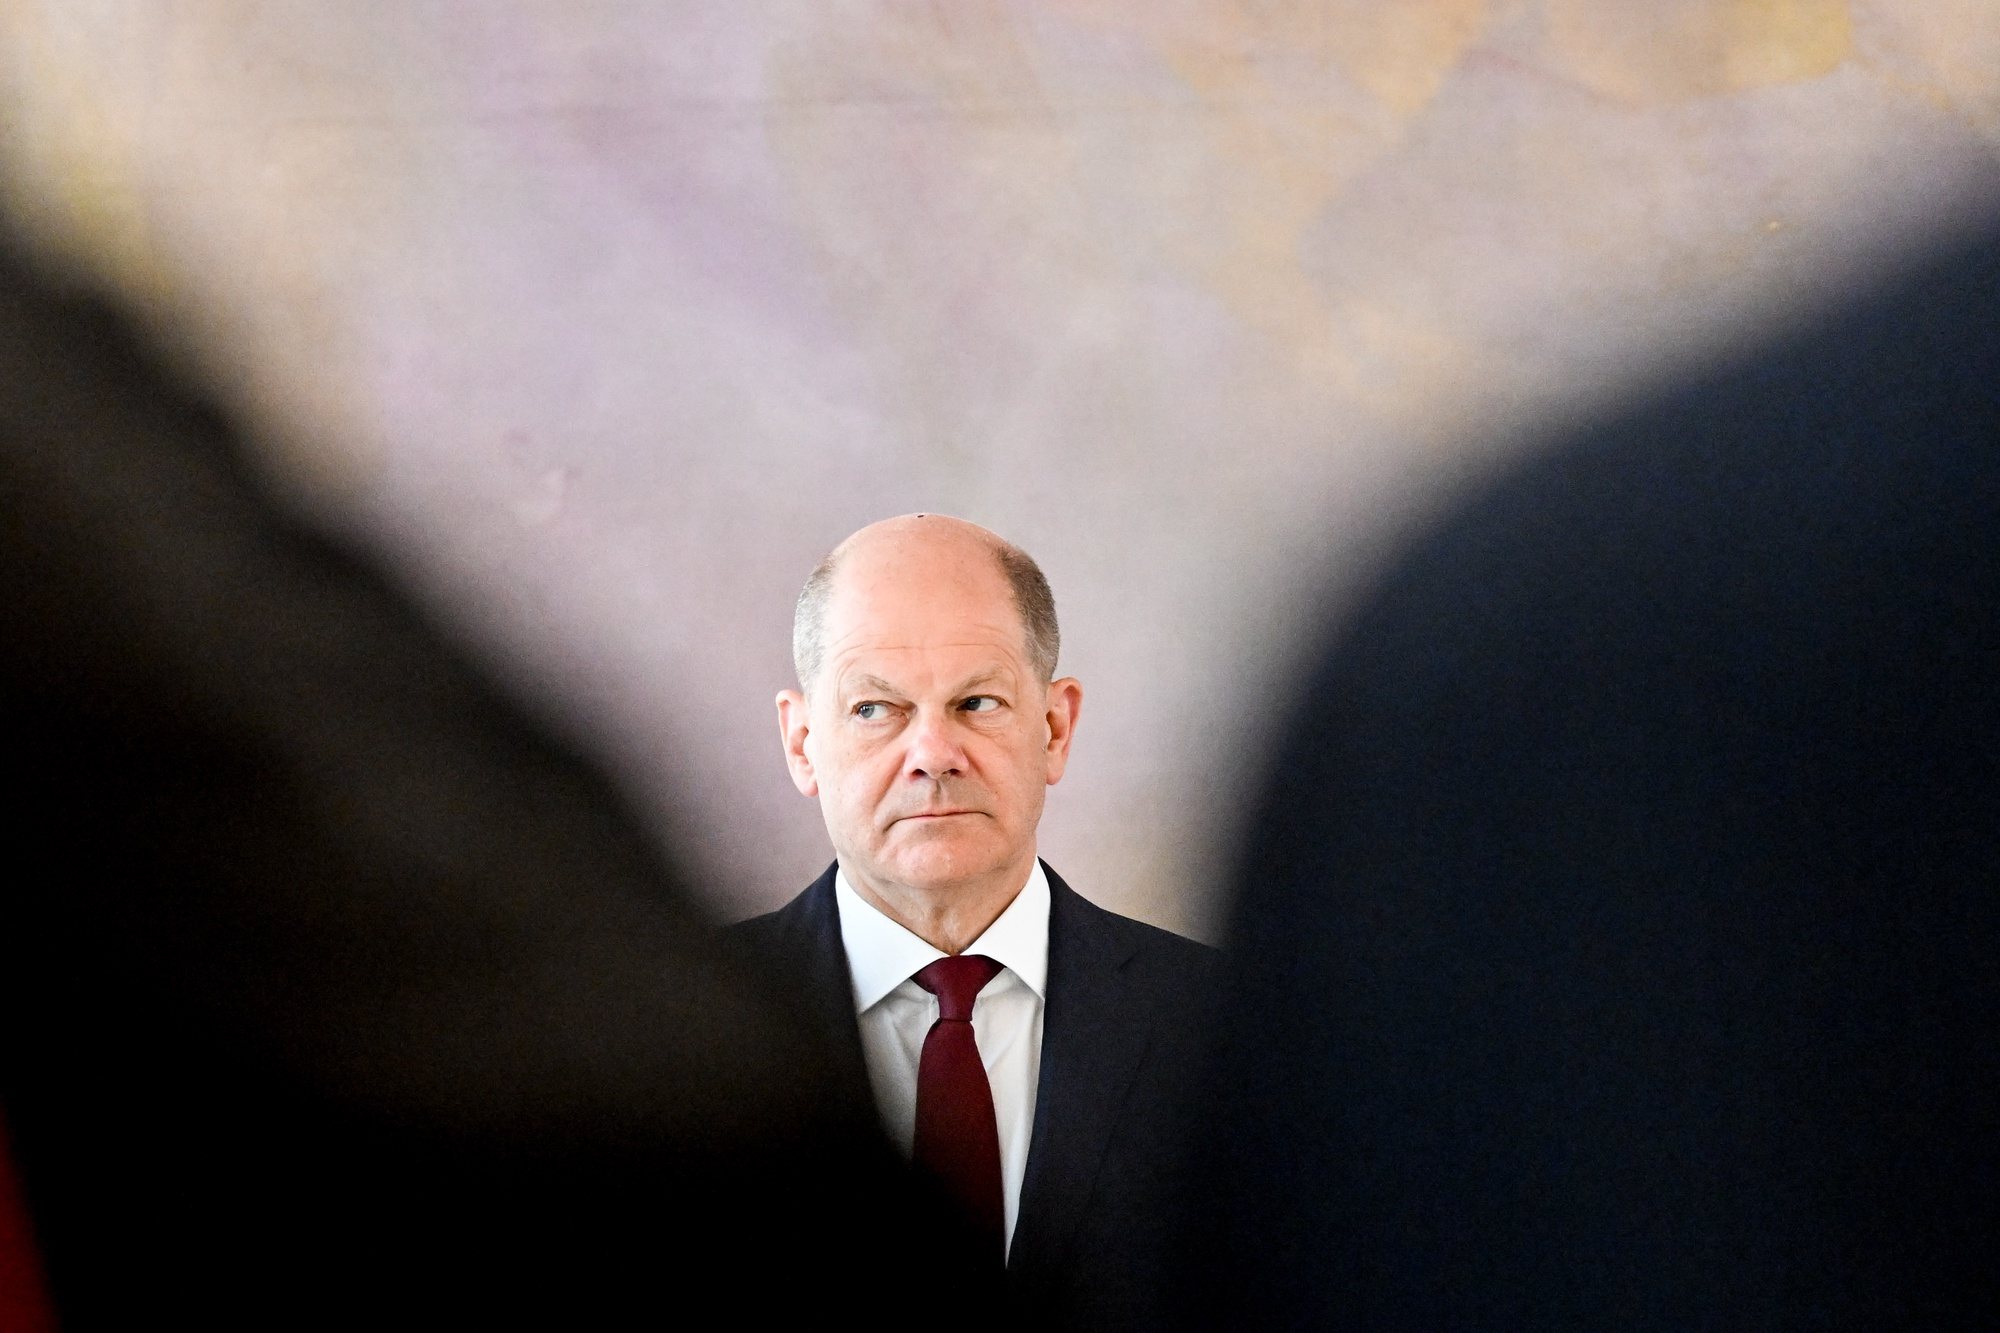 epa09908539 German Chancellor Olaf Scholz during a dismissal and appointment ceremony of German Minister for Family Affairs, Senior Citizens, Women and Youth in Berlin, Germany, 25 April 2022.  EPA/FILIP SINGER